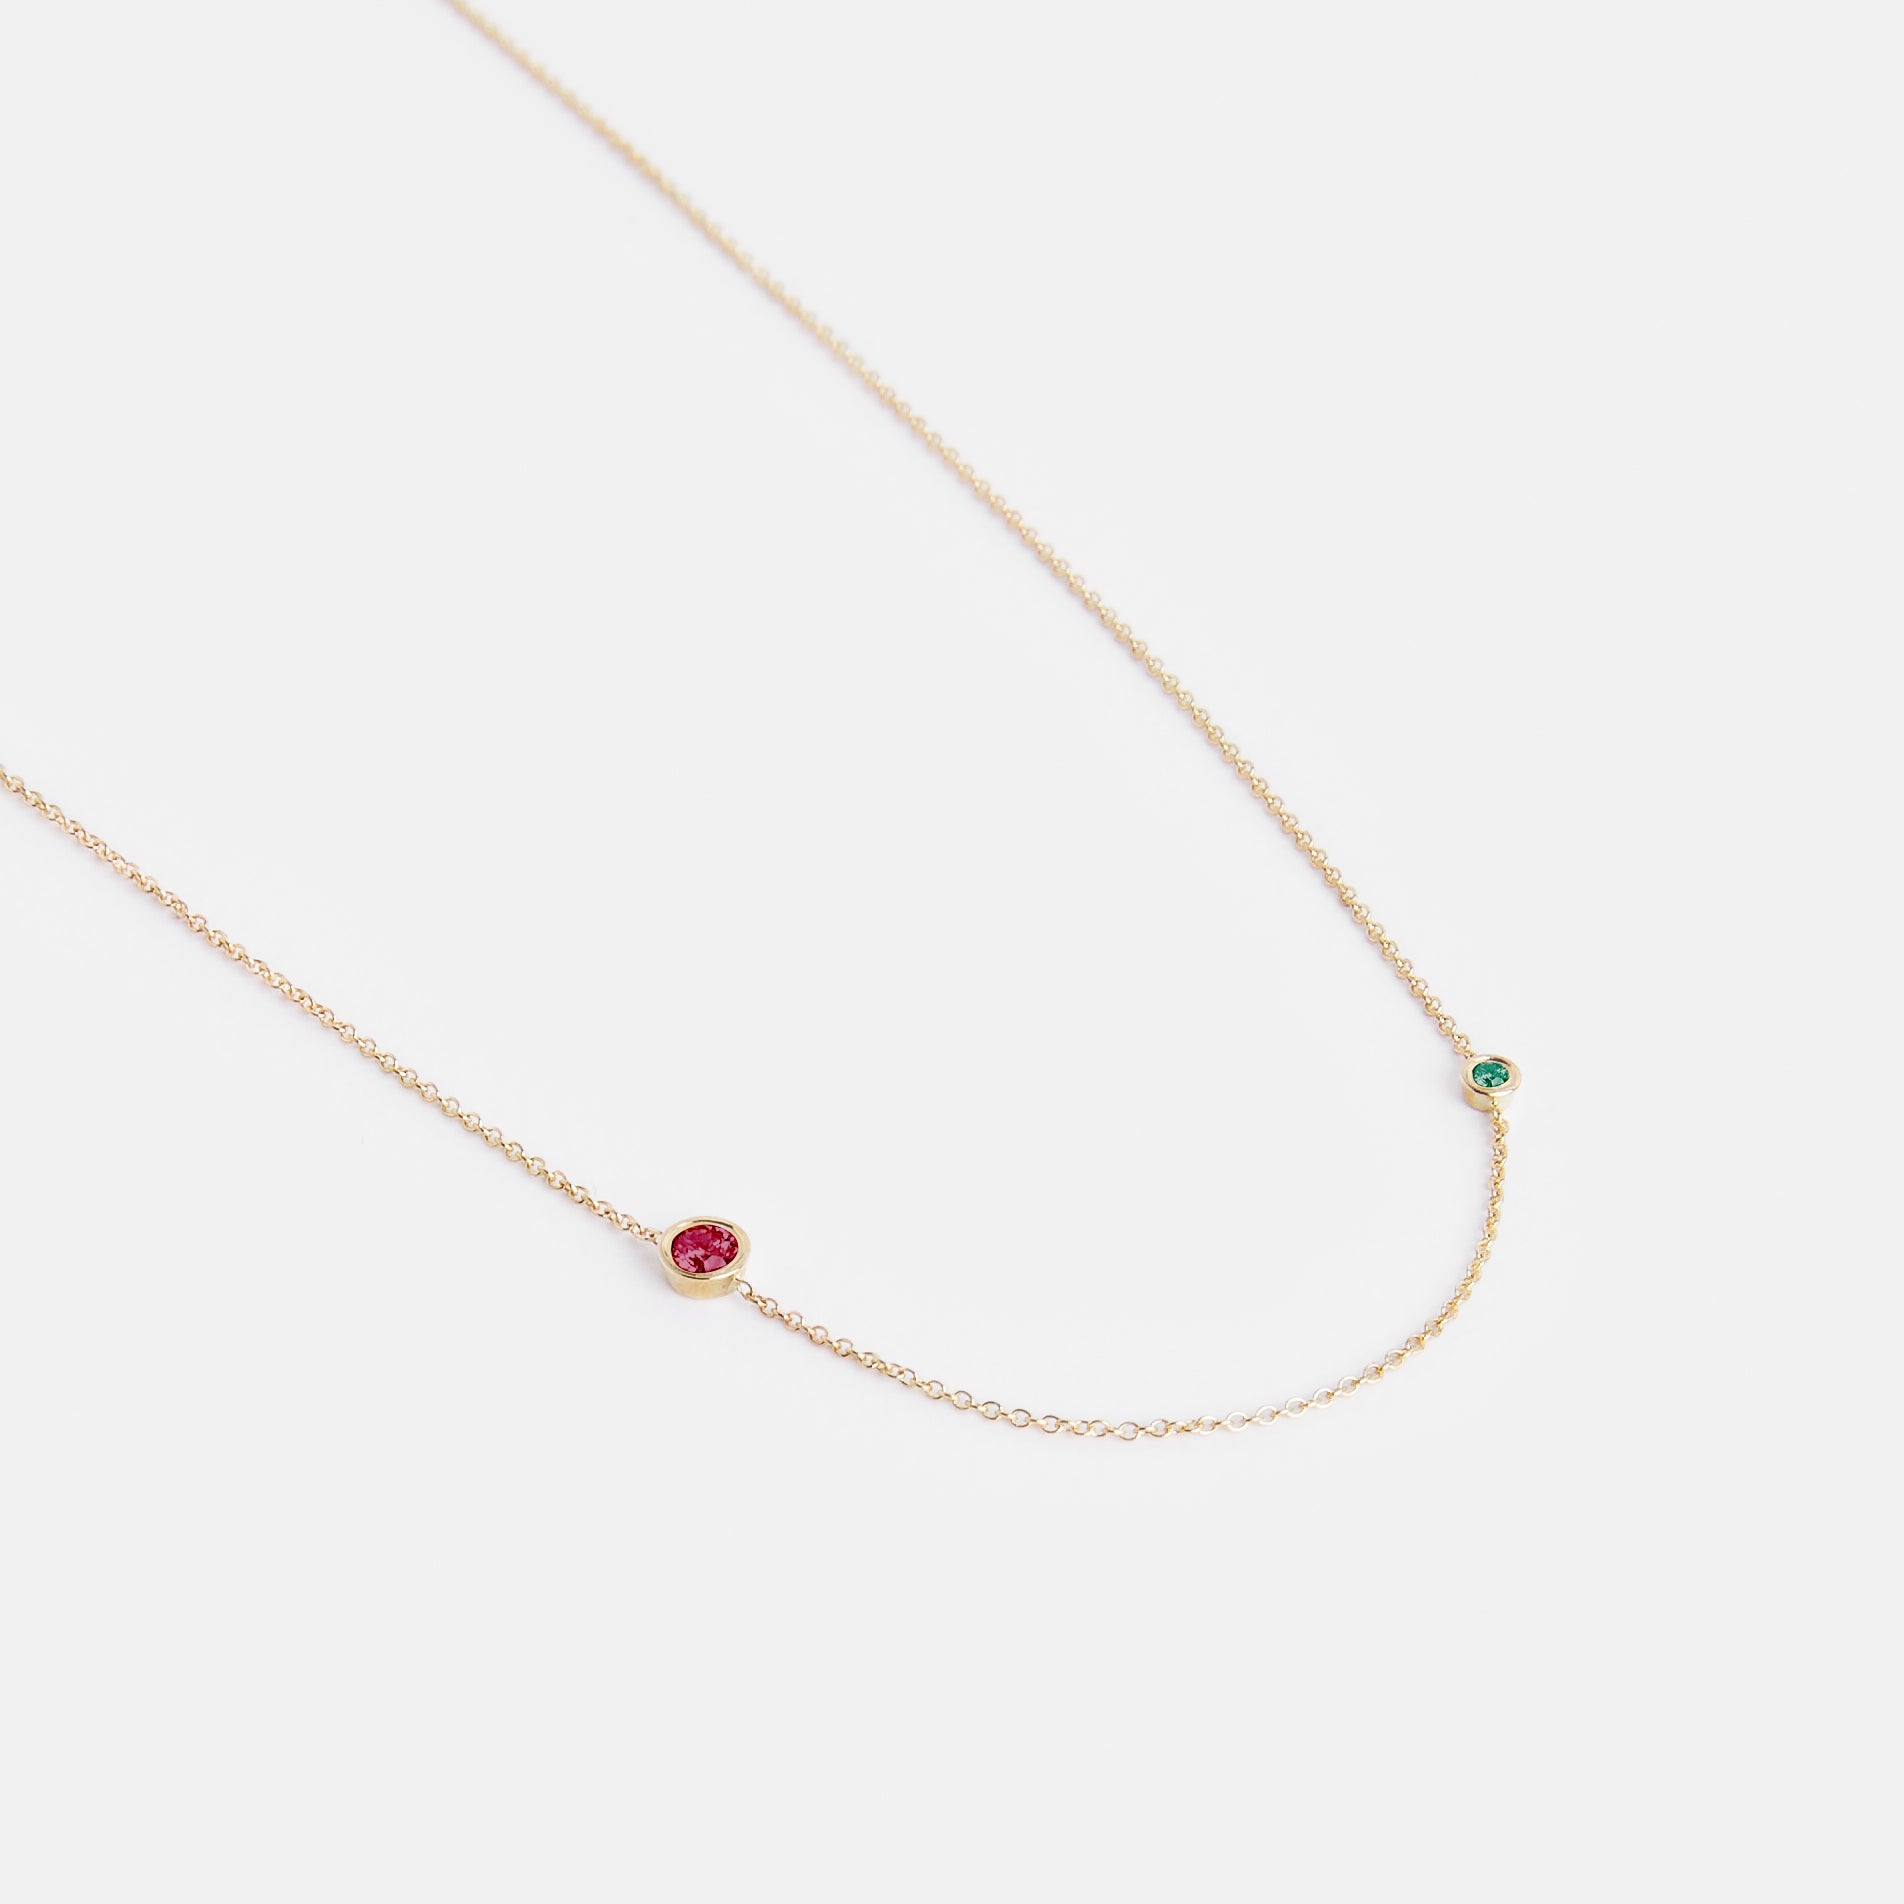 Iba Simple Necklace in 14k Gold set with Ruby and Emerald By SHW Fine Jewelry NYC